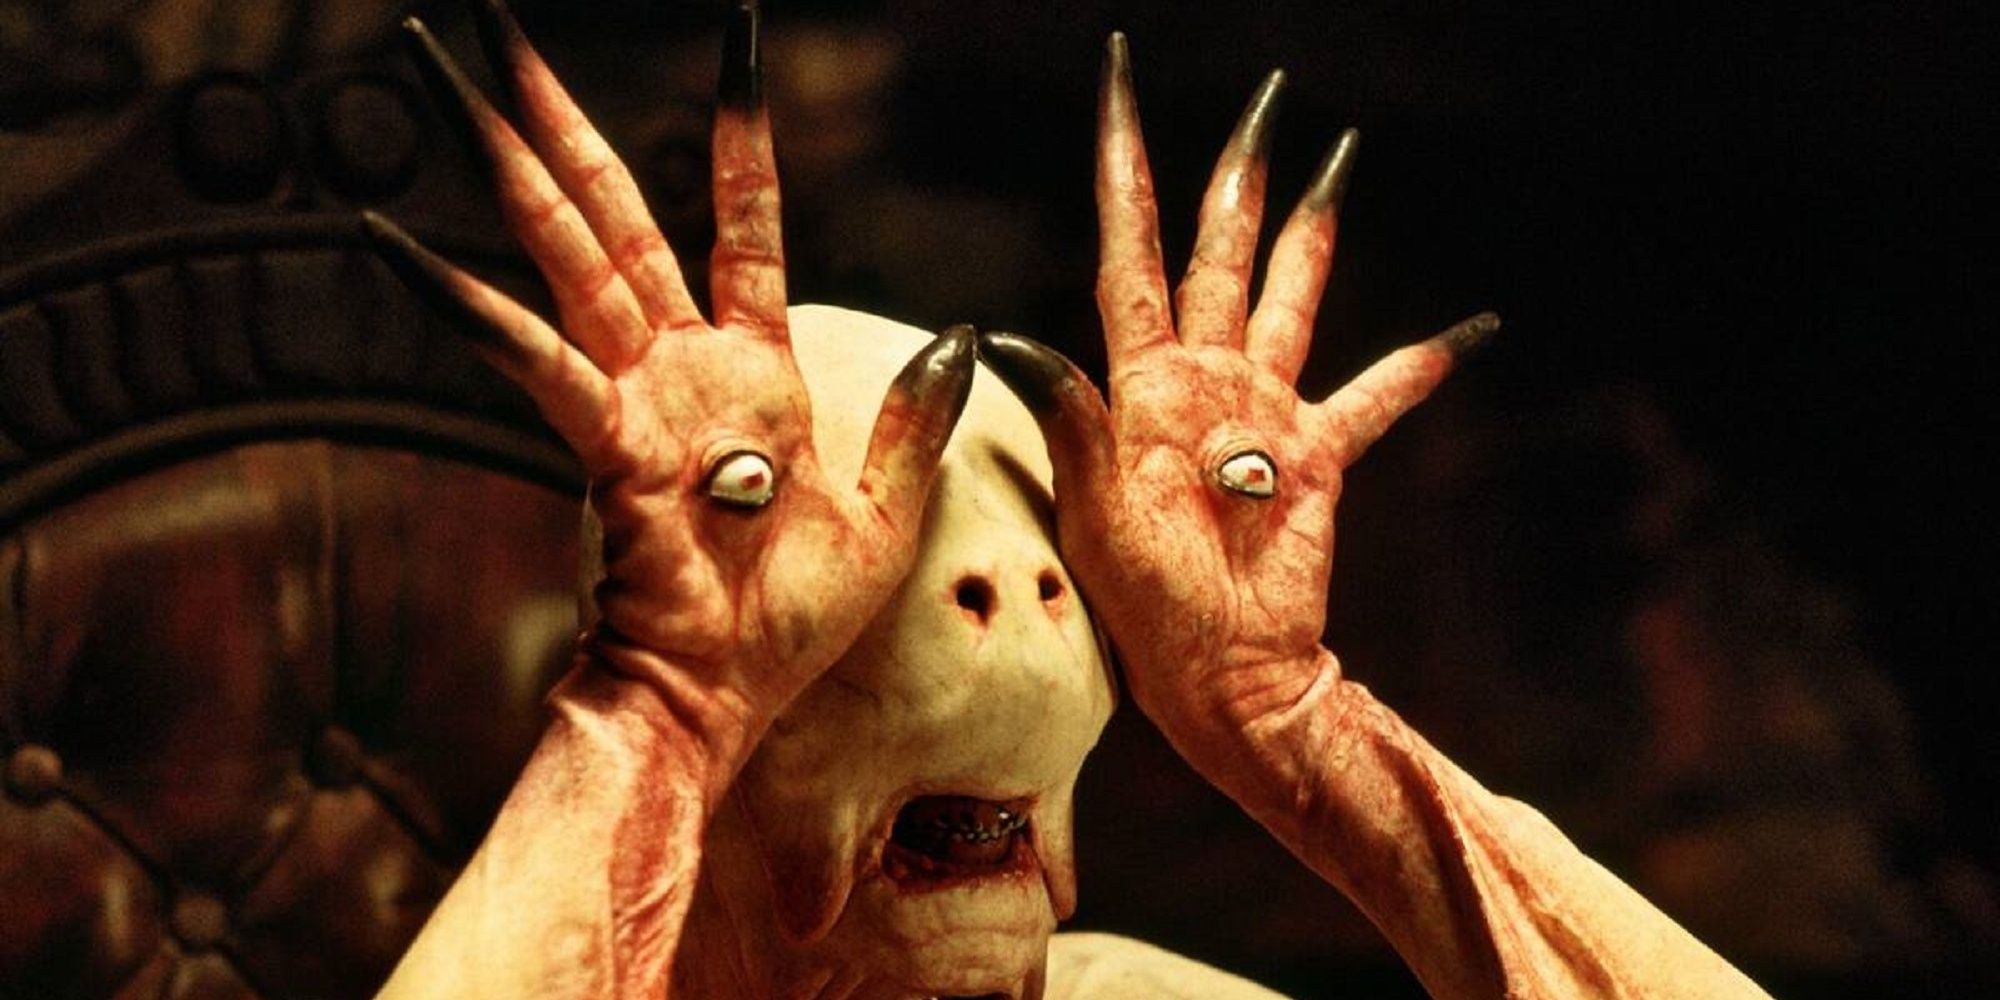 Pale man showing off eyeball on palm in Pan's Labyrinth